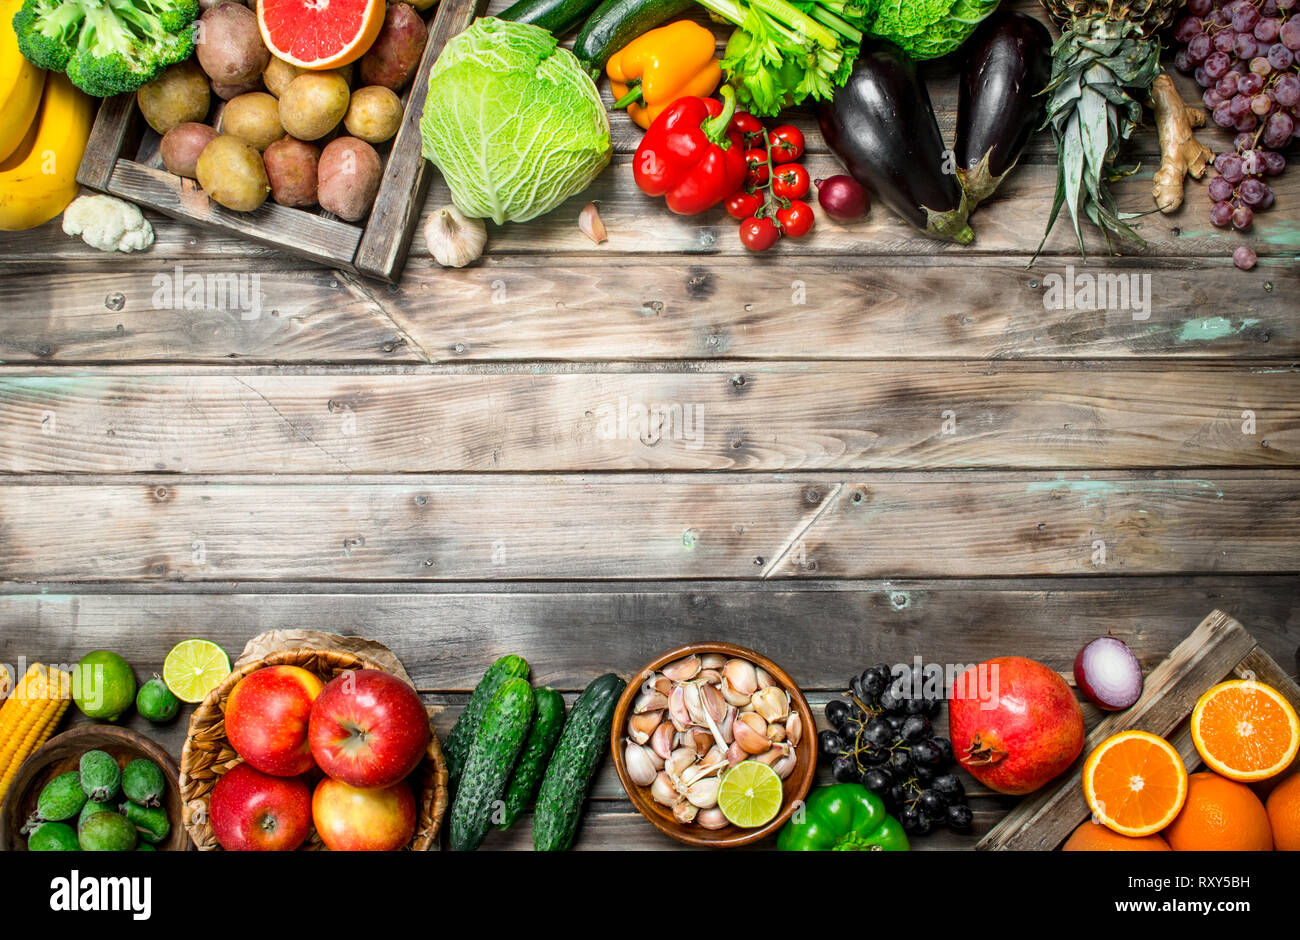 Organic food. Fresh fruits and vegetables. On a wooden background. Stock Photo